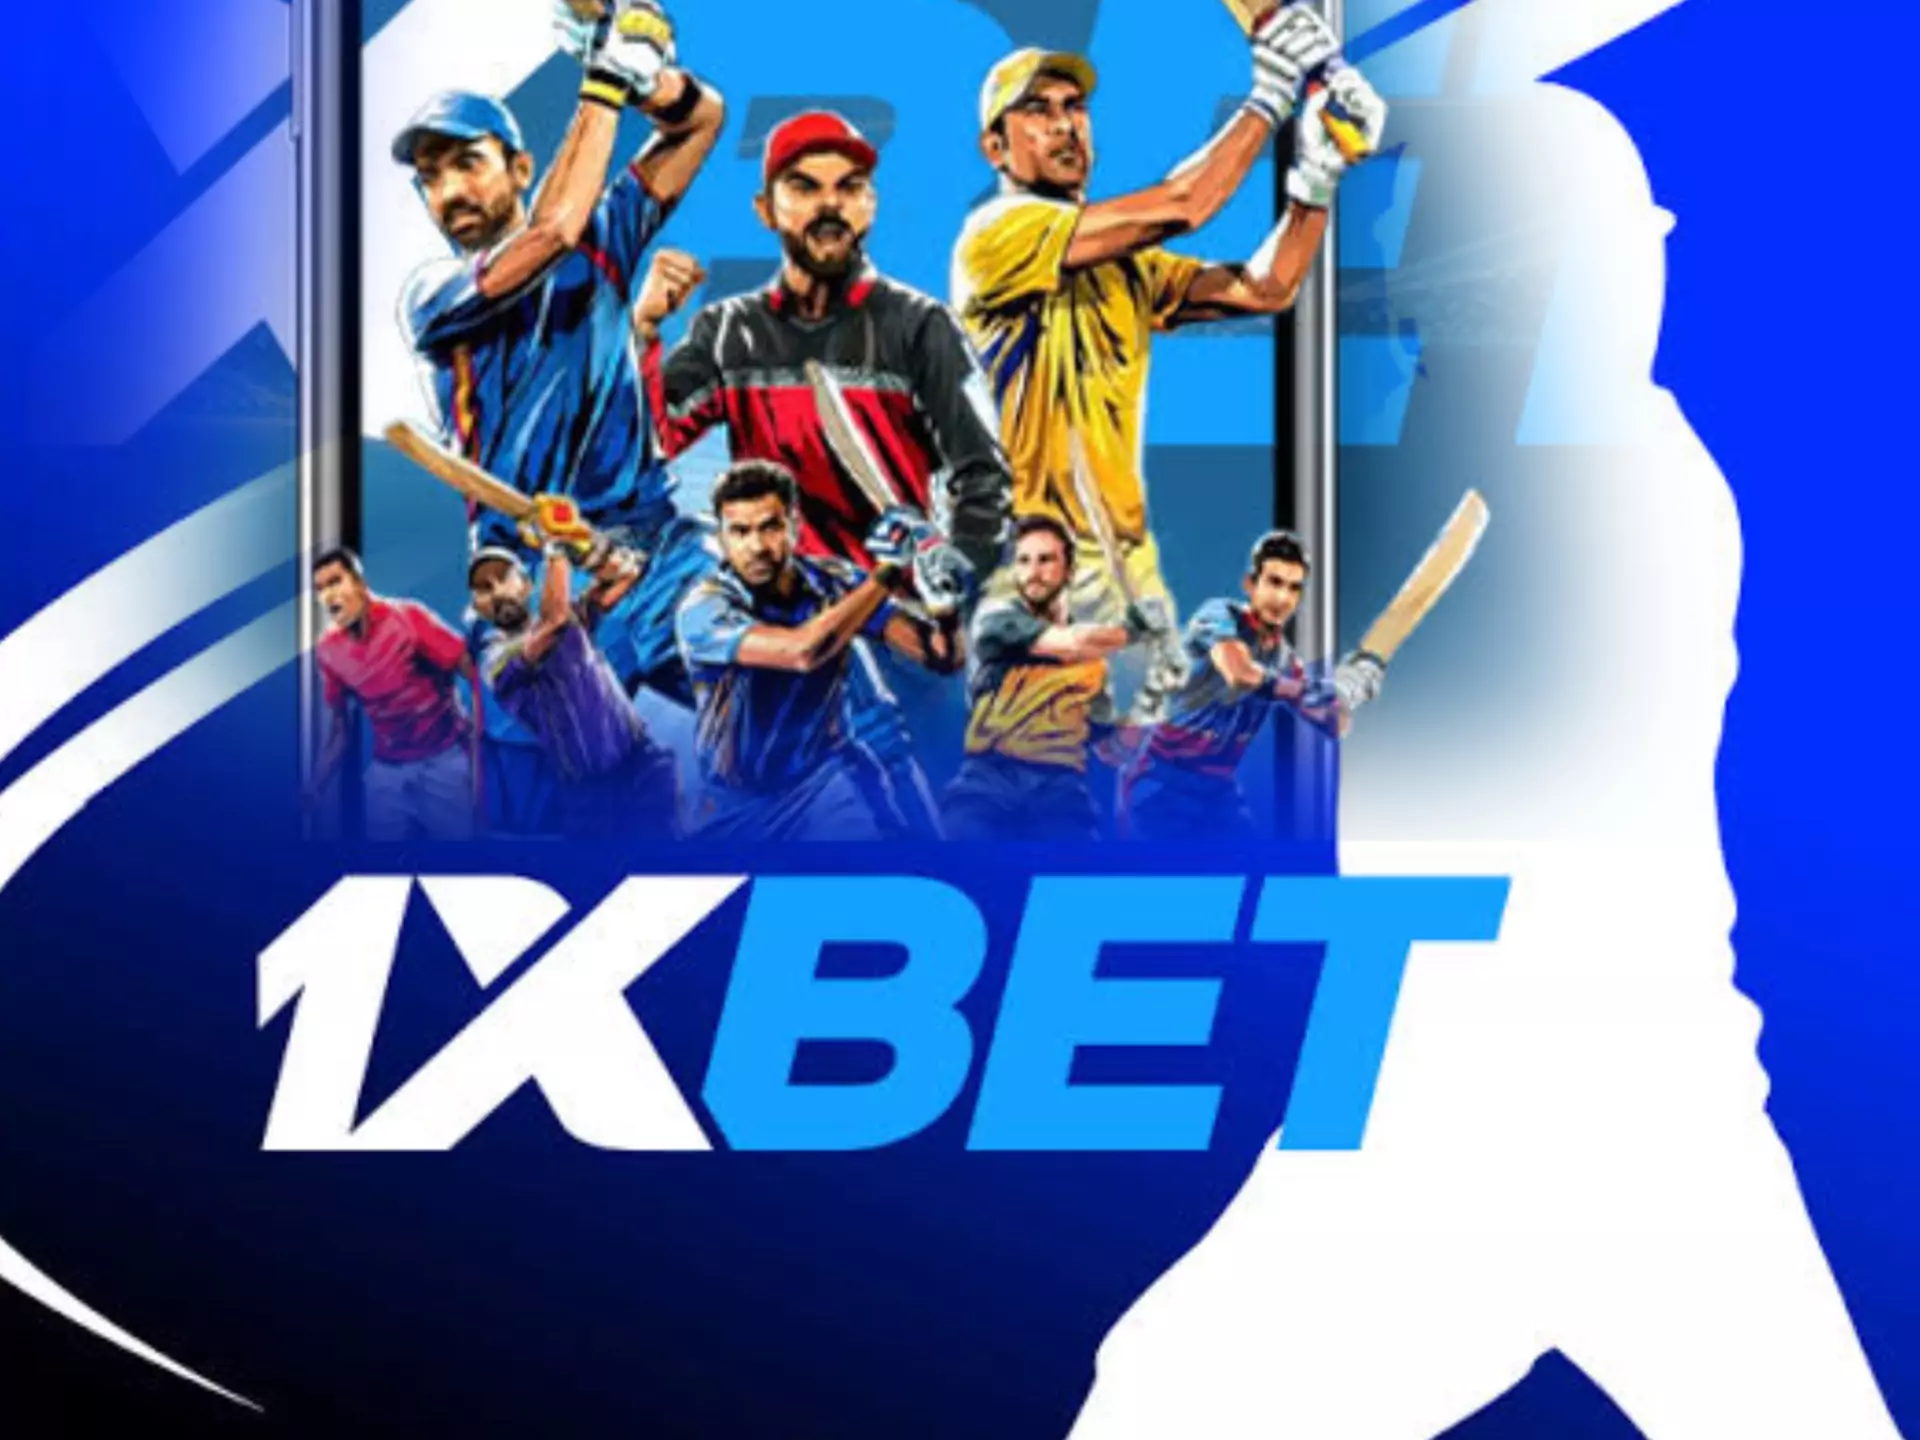 Sign up for 1xbet and start betting on cricket.